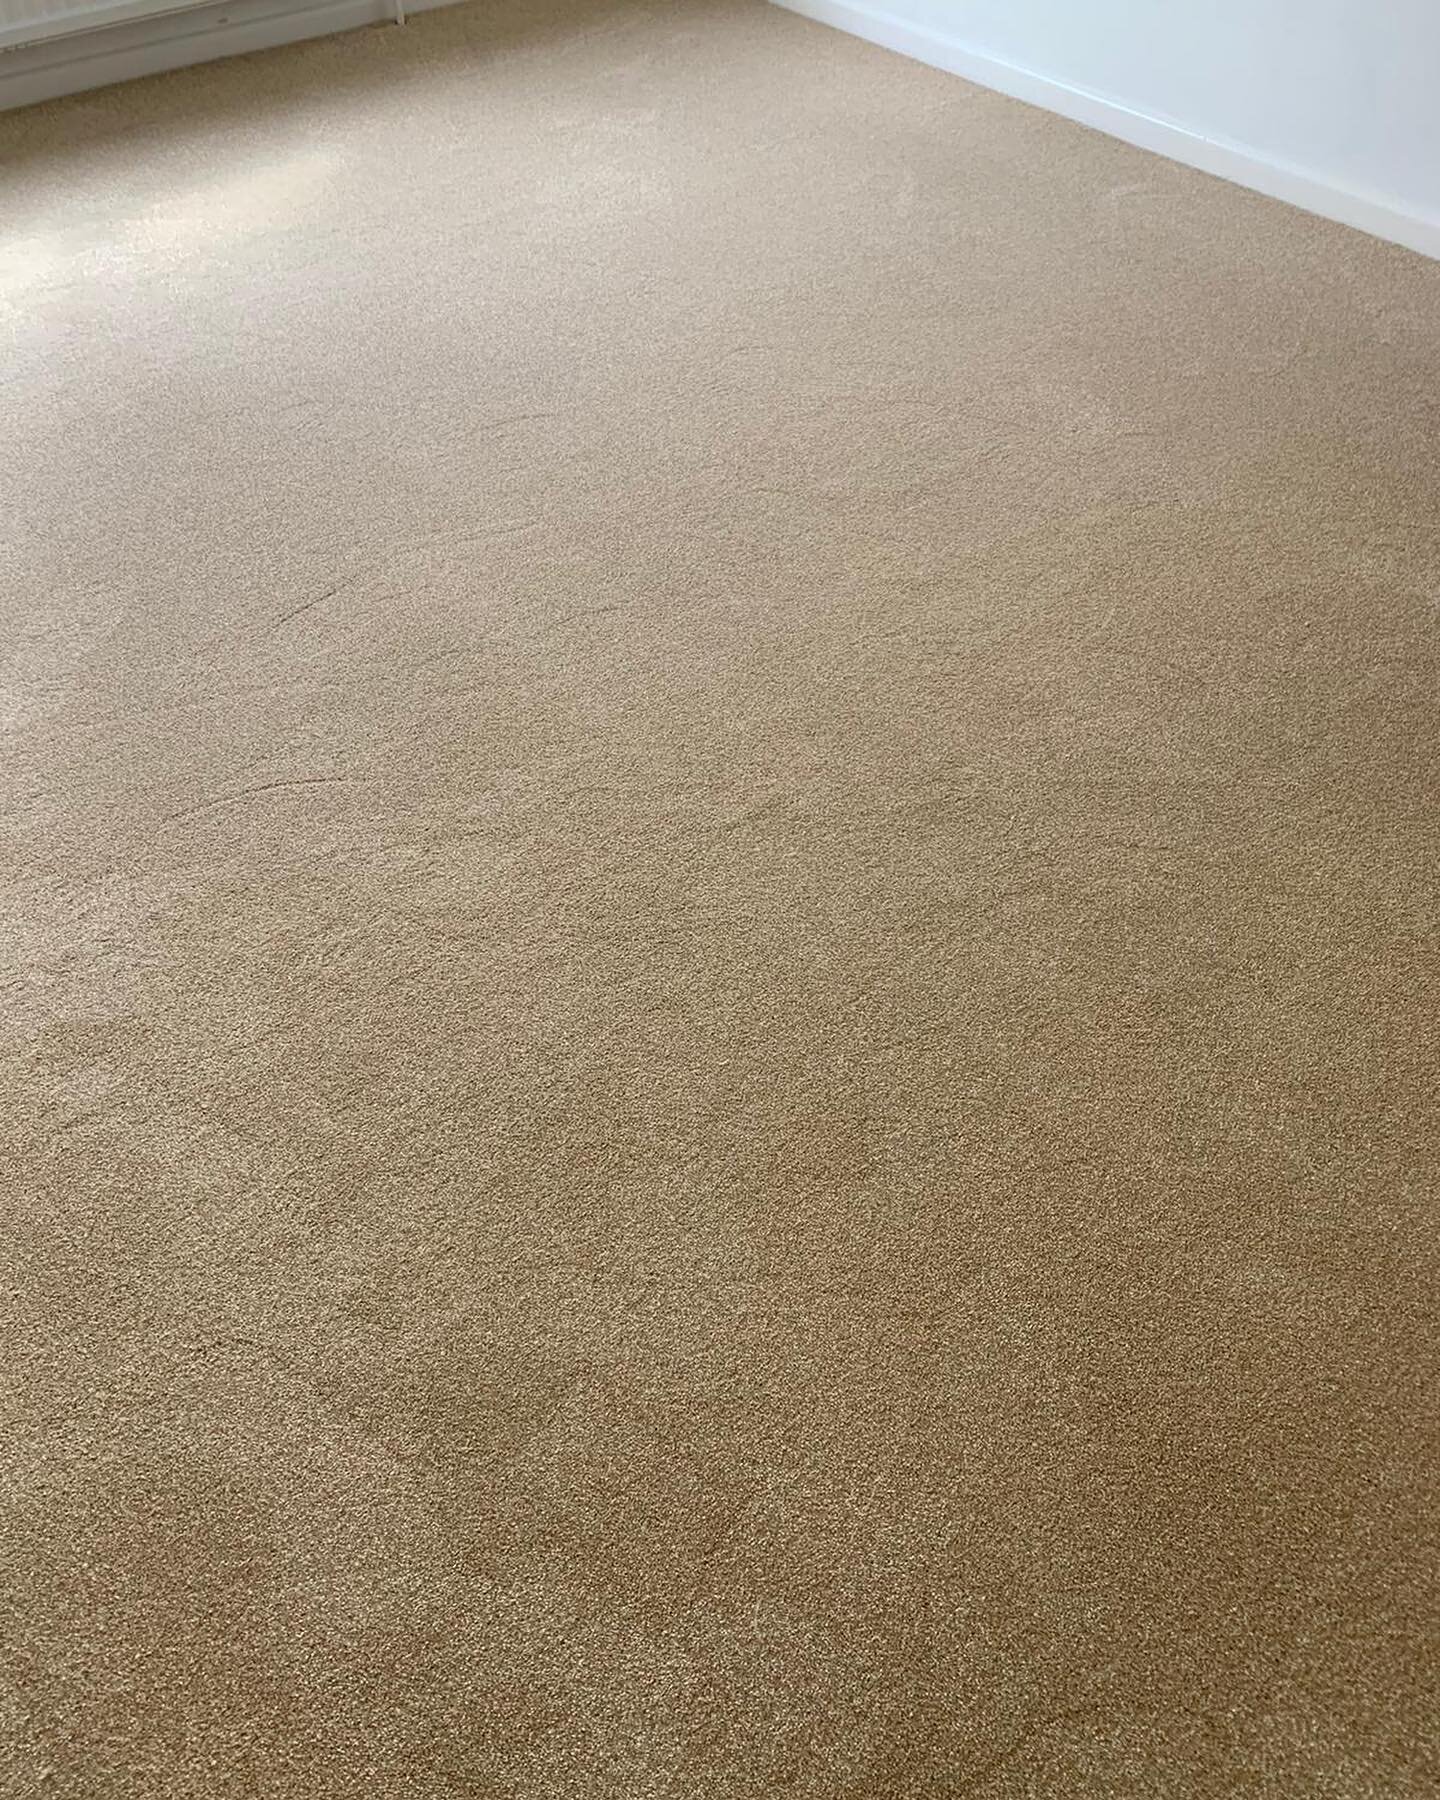 Beautiful beige! Stain Free Ultra Carpet by @abingdonflooring in colour &lsquo;Summer Breeze&rsquo; supplied and fitted.

Get in touch for an appointment at our showroom or the comfort of your own home. We provide a free measuring service and no obli